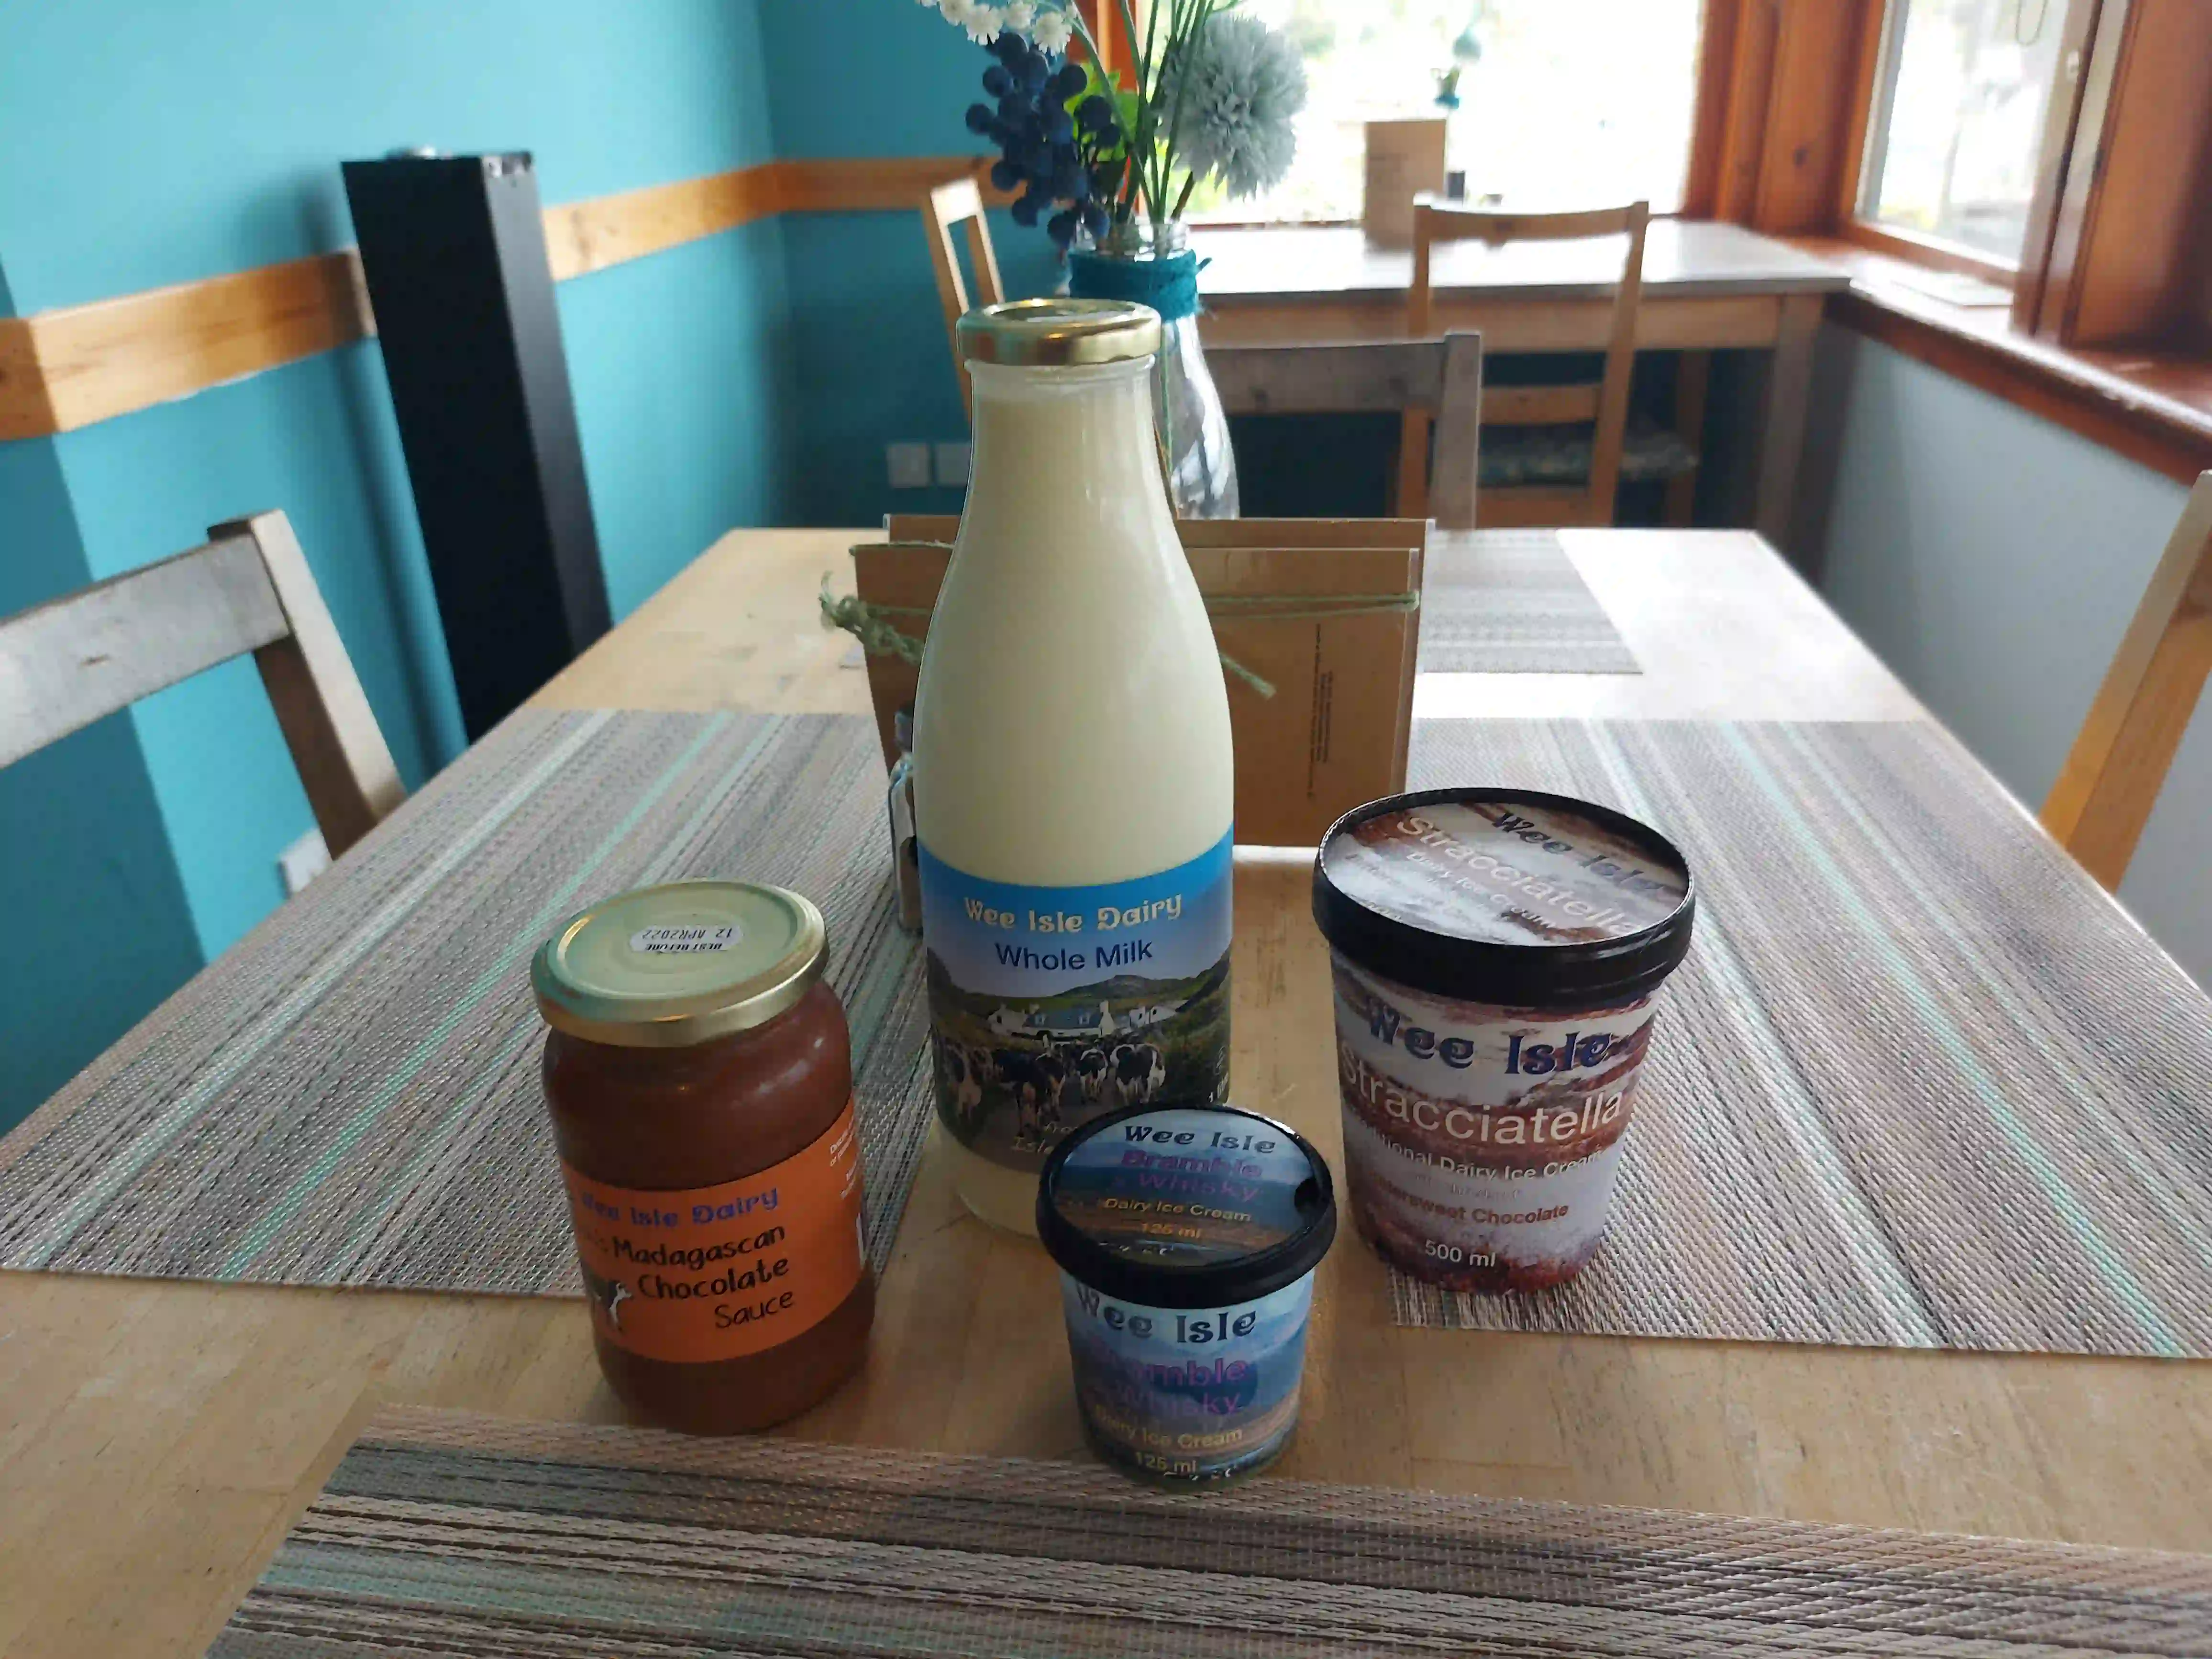 Wee Isle Dairy products on a table